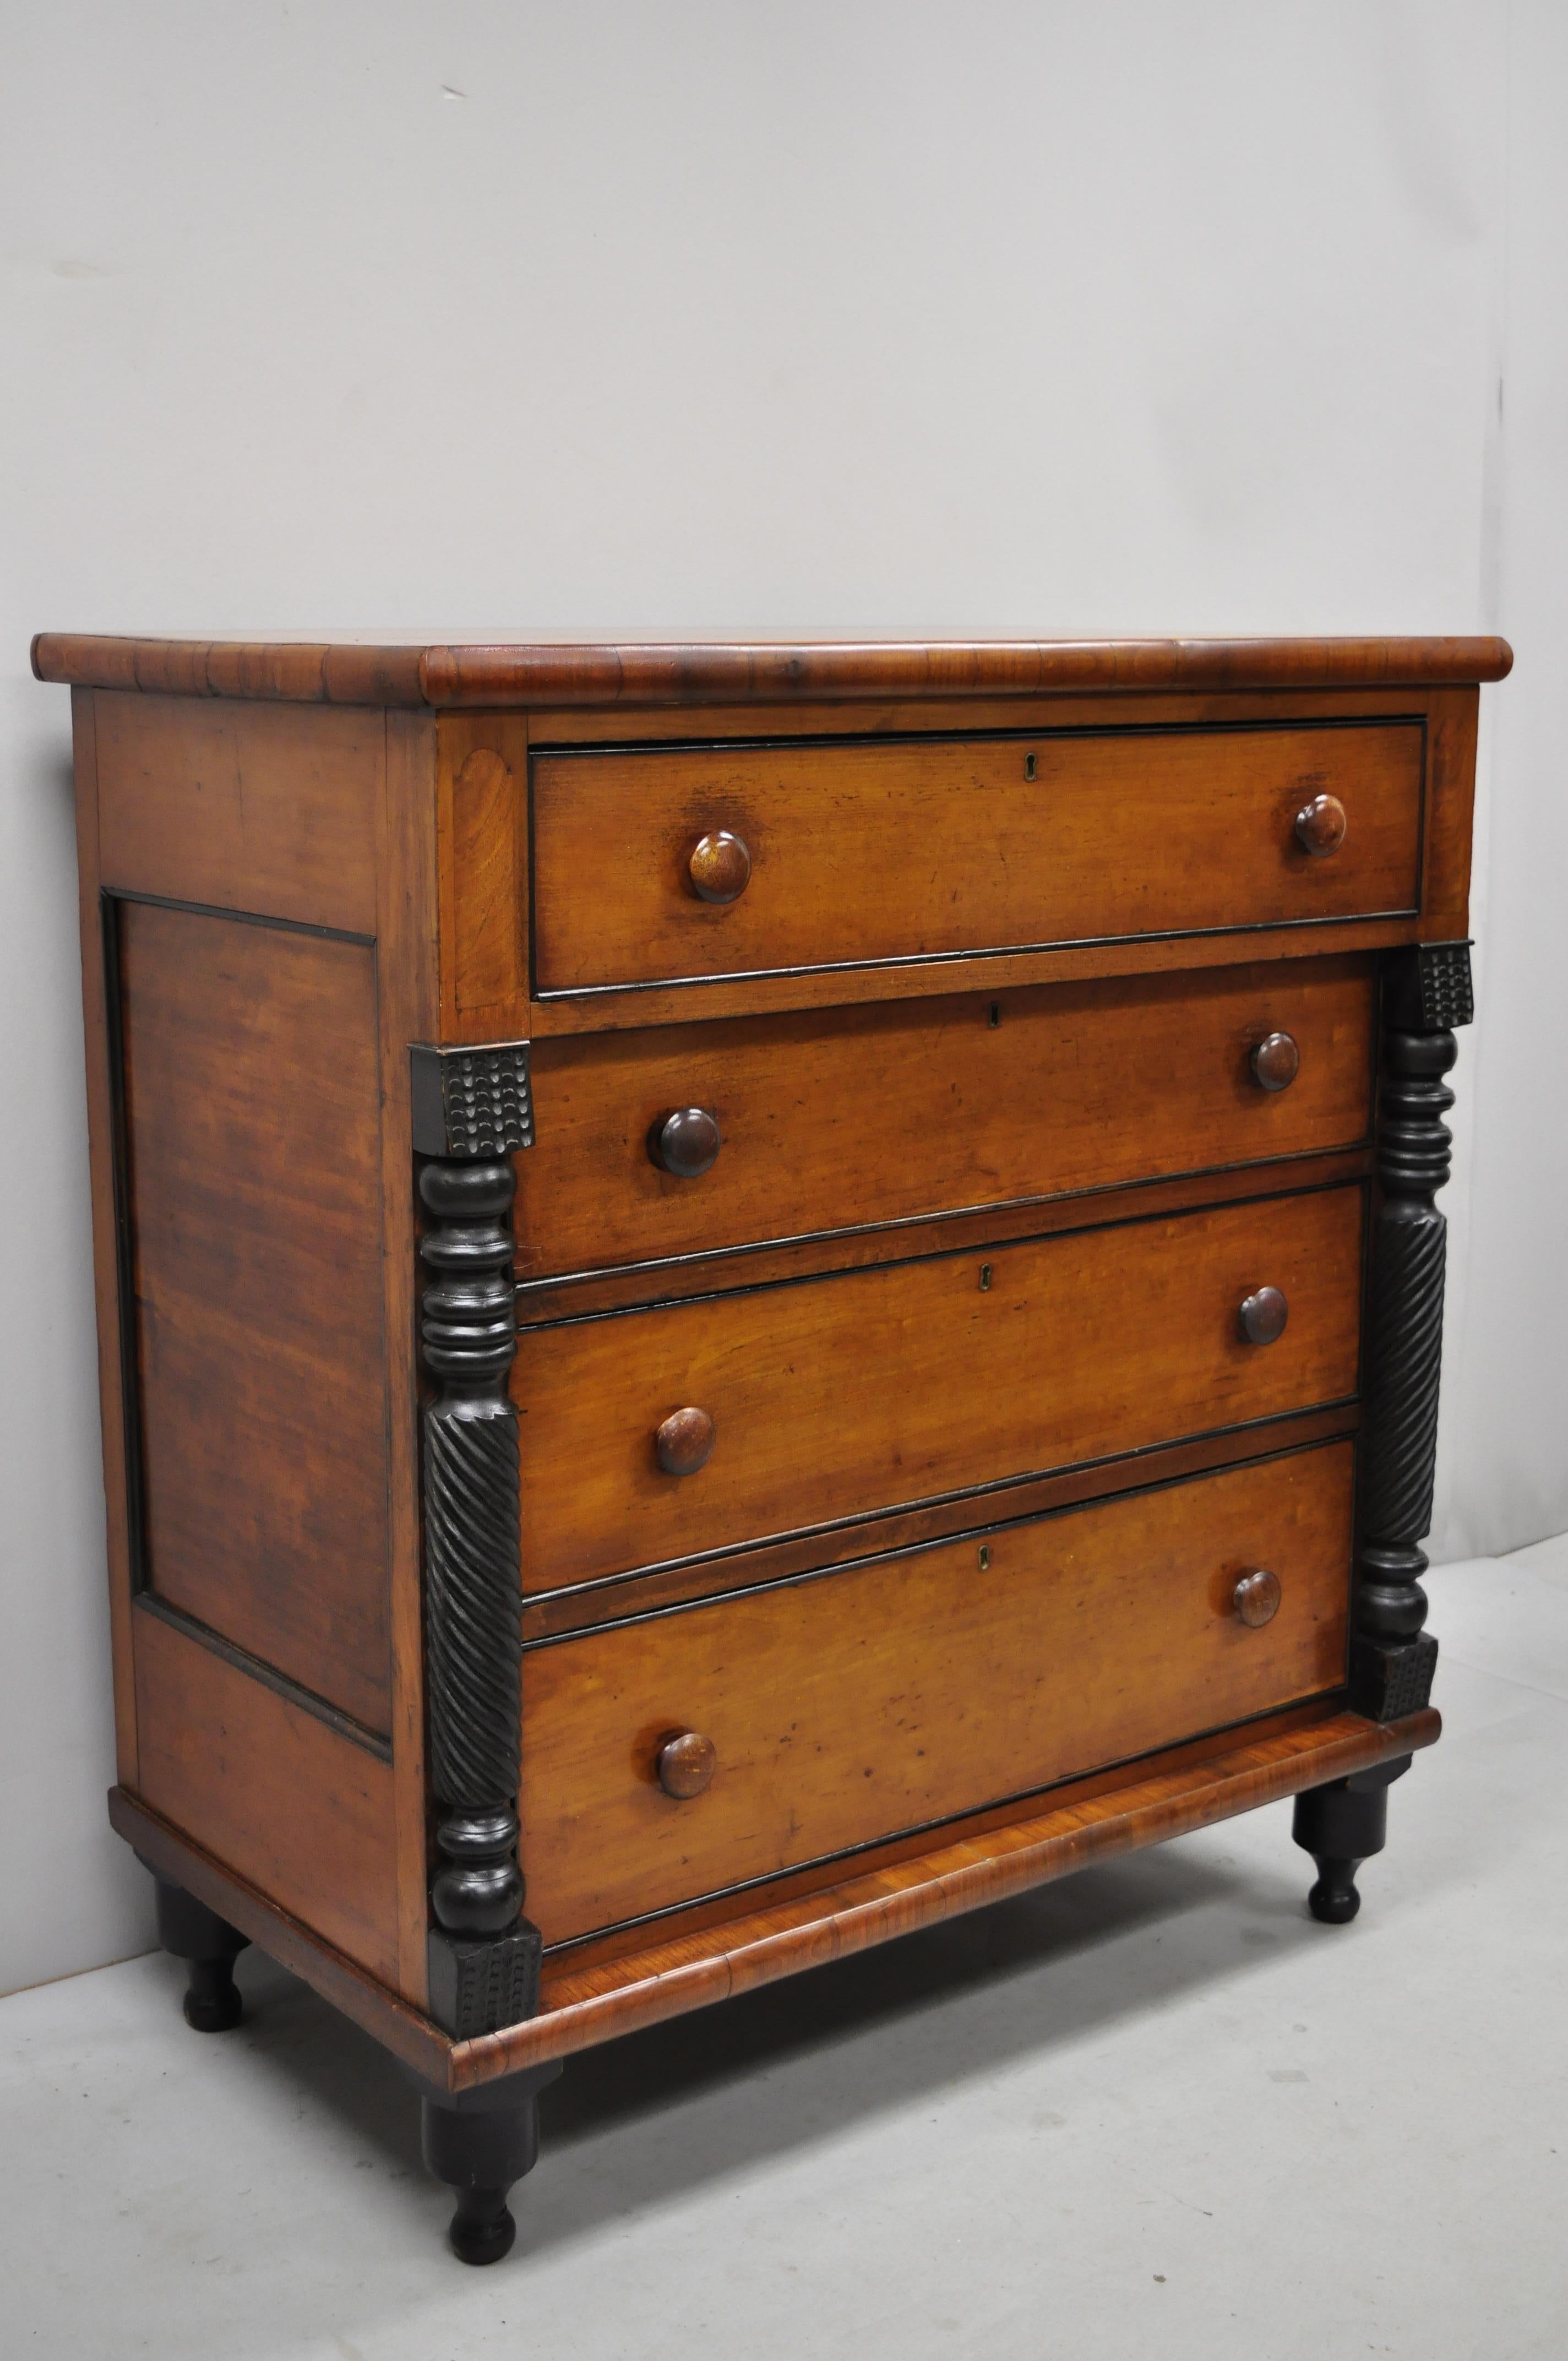 Late 19th century American Federal Sheraton mahogany Empire tall chest dresser. Item includes black painted accents, spiral carved columns, beautiful wood grain, no key, but unlocked, 4 dovetailed drawers, very nice antique item, quality American